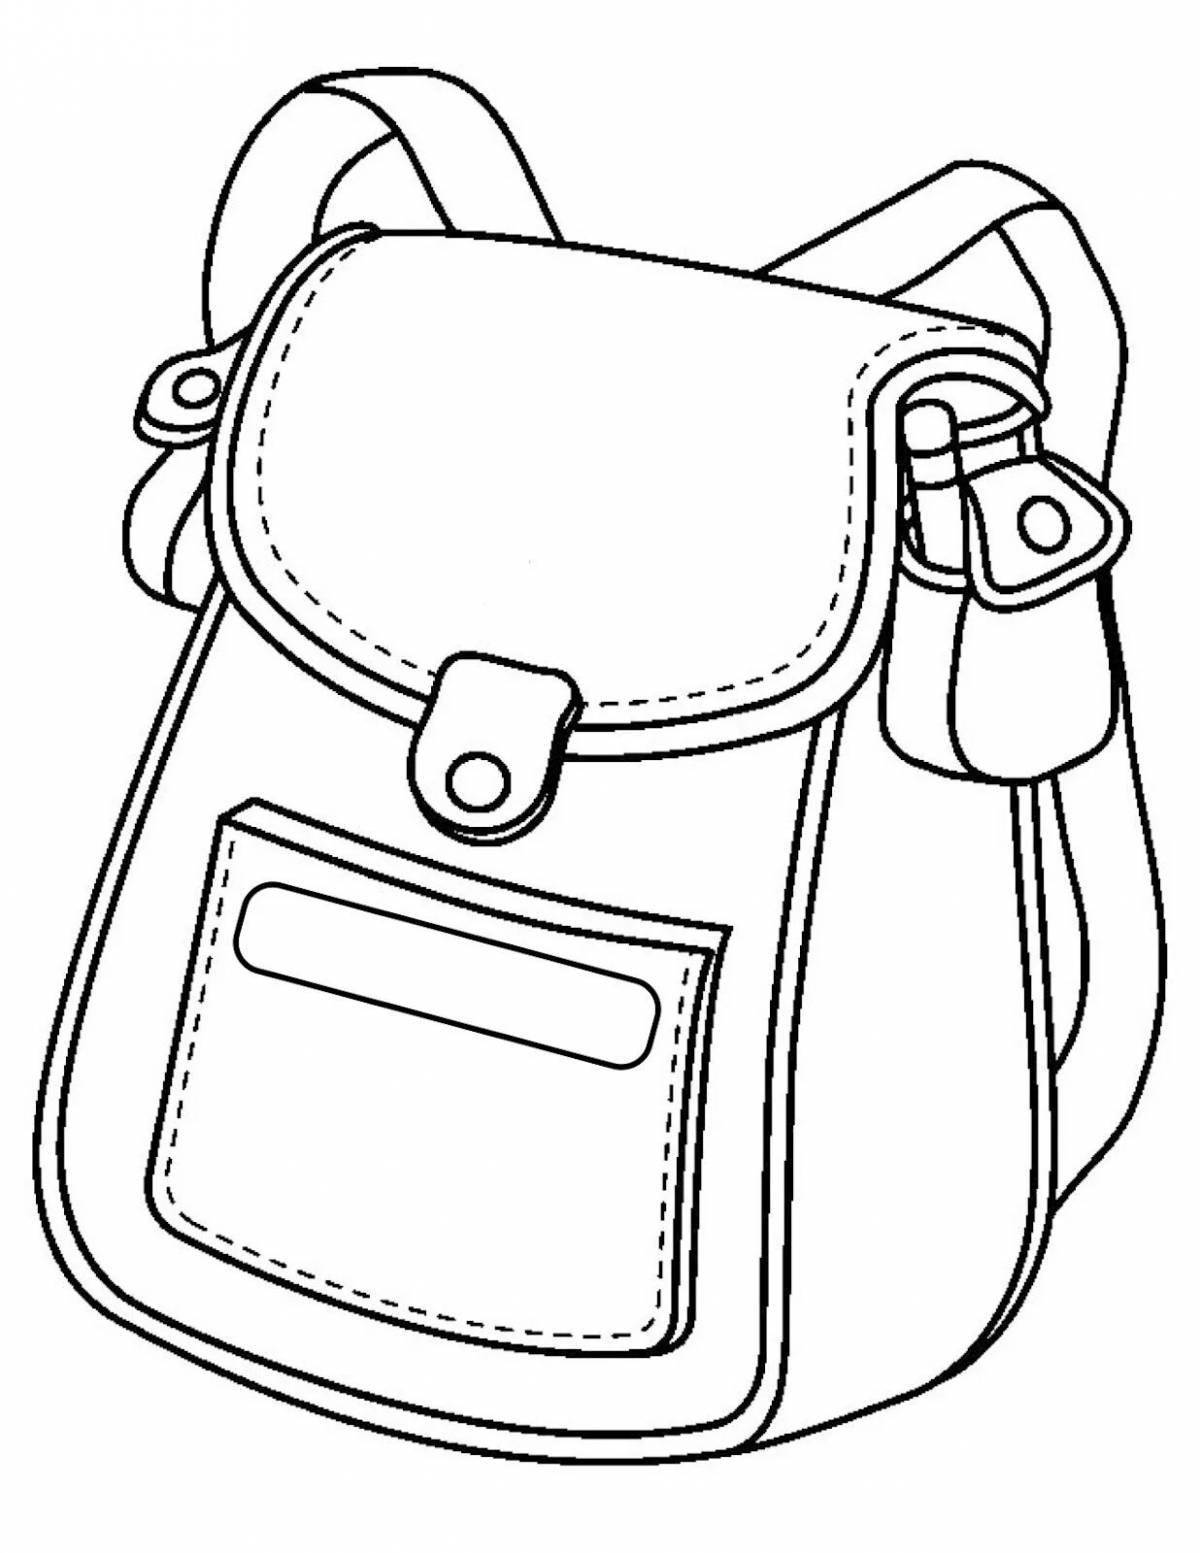 Adorable briefcase coloring page for kids